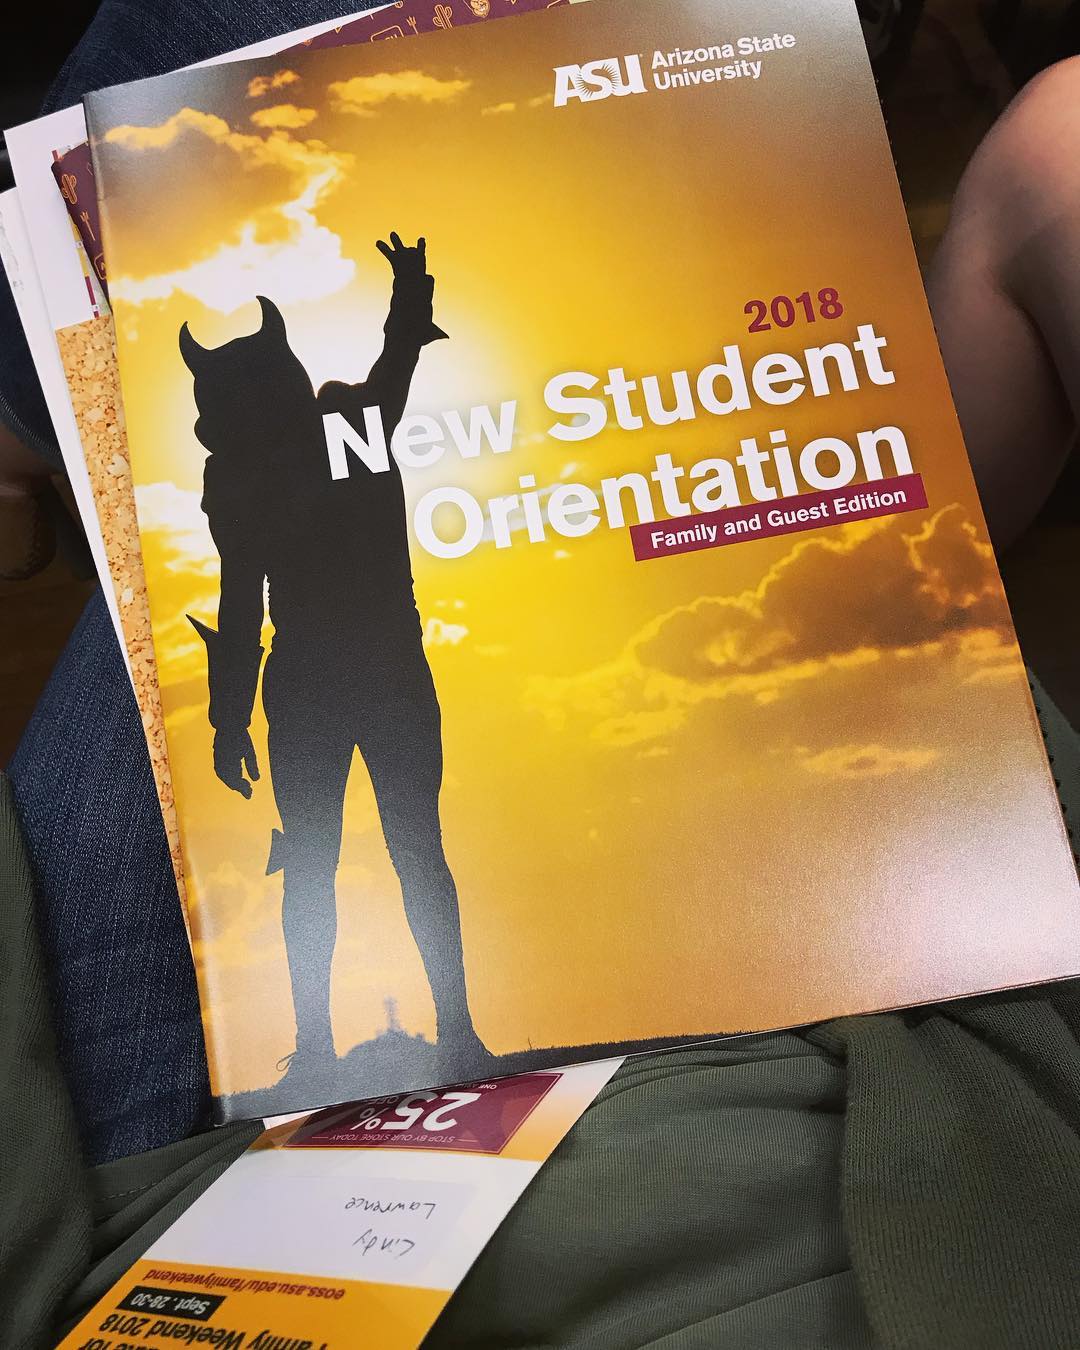 ASU New Student Orientation Packet. Photo by Instagram user @cindyleelawrence